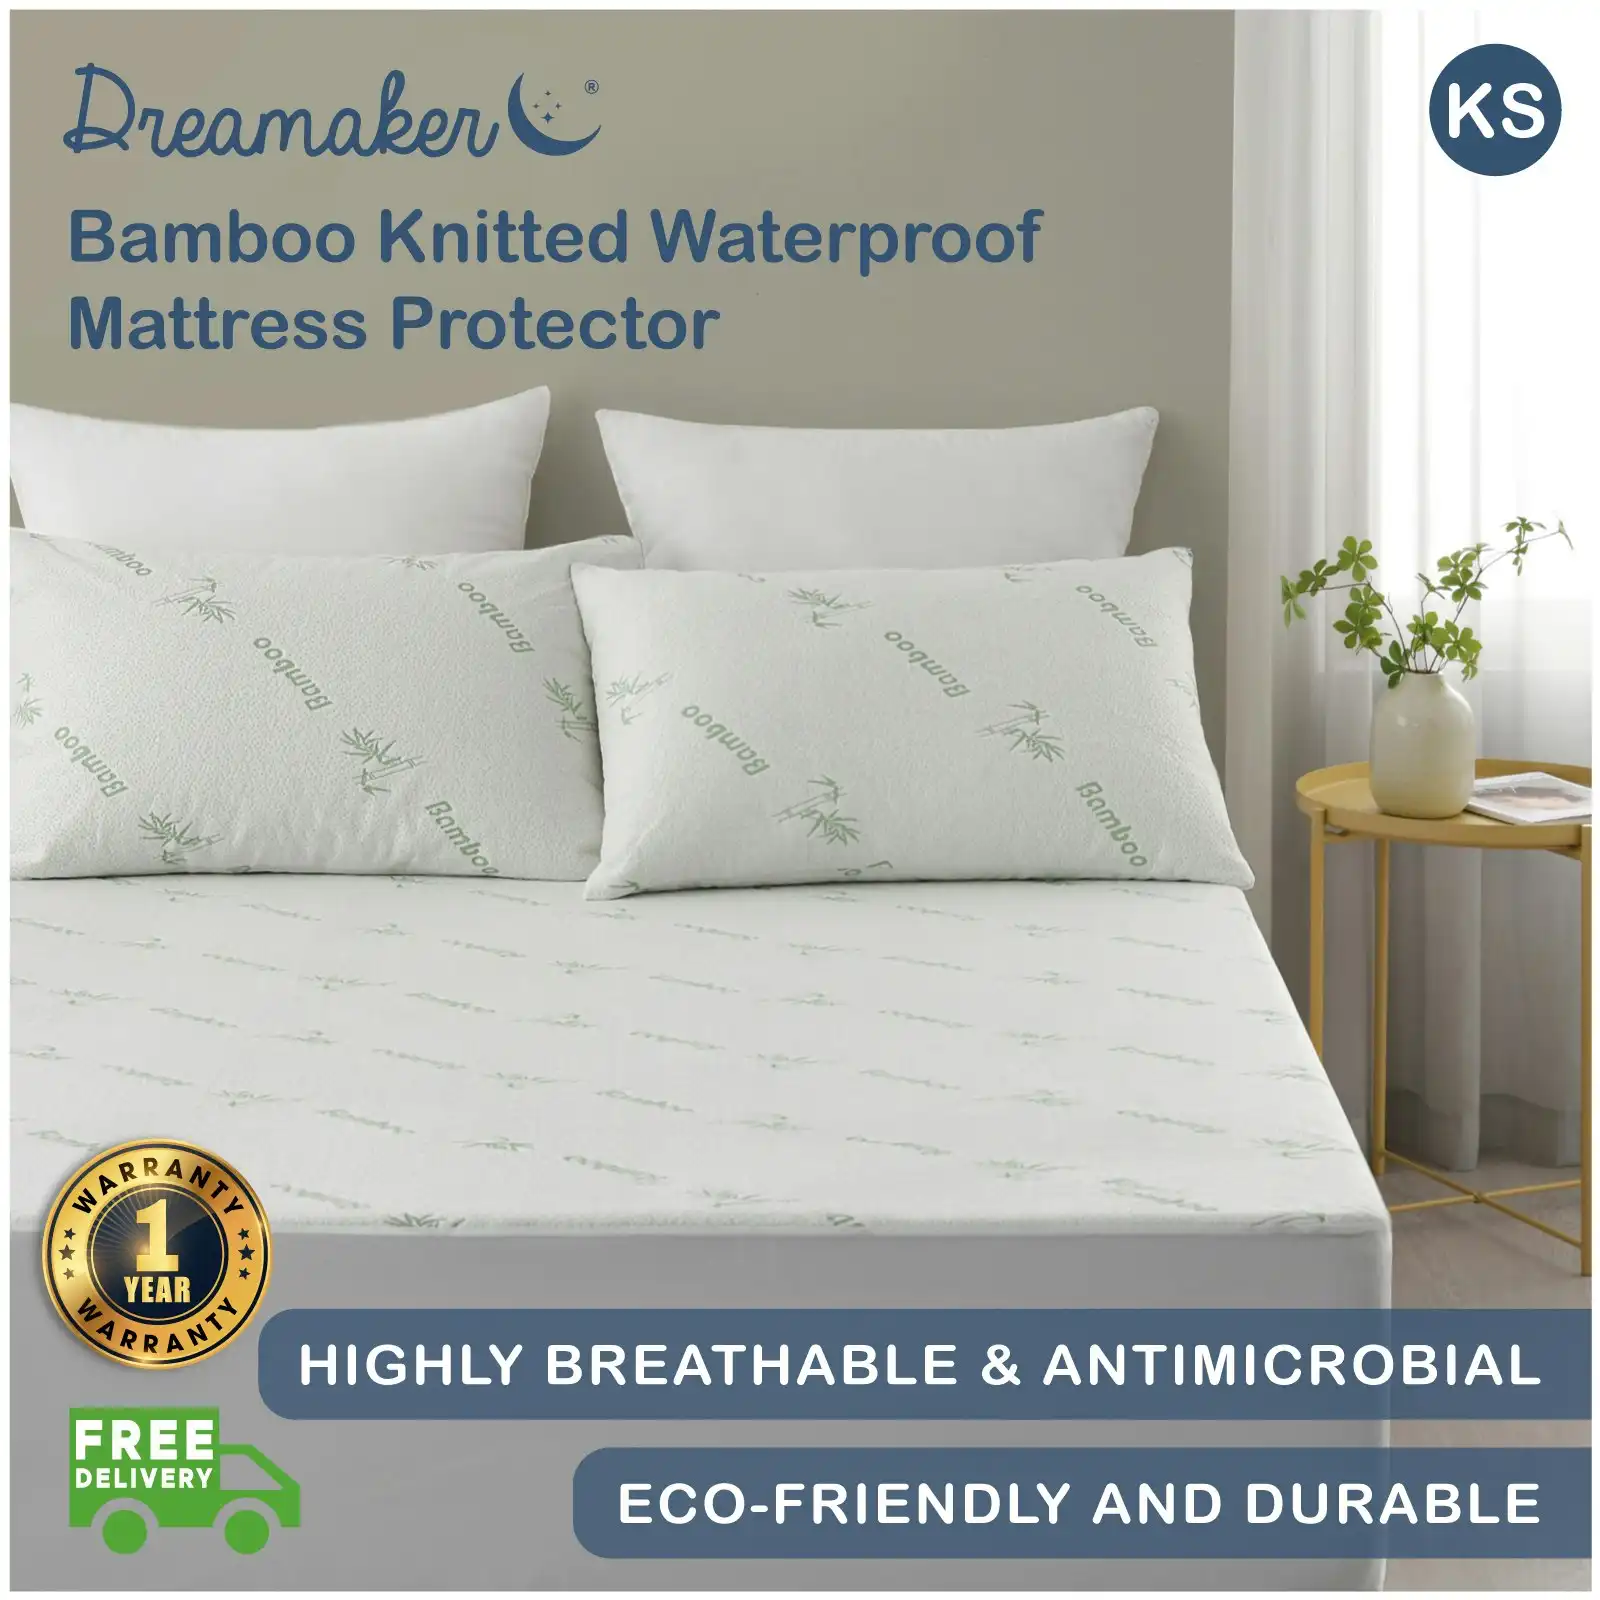 Dreamaker Bamboo Knitted Waterproof Mattress Protector King Single Bed